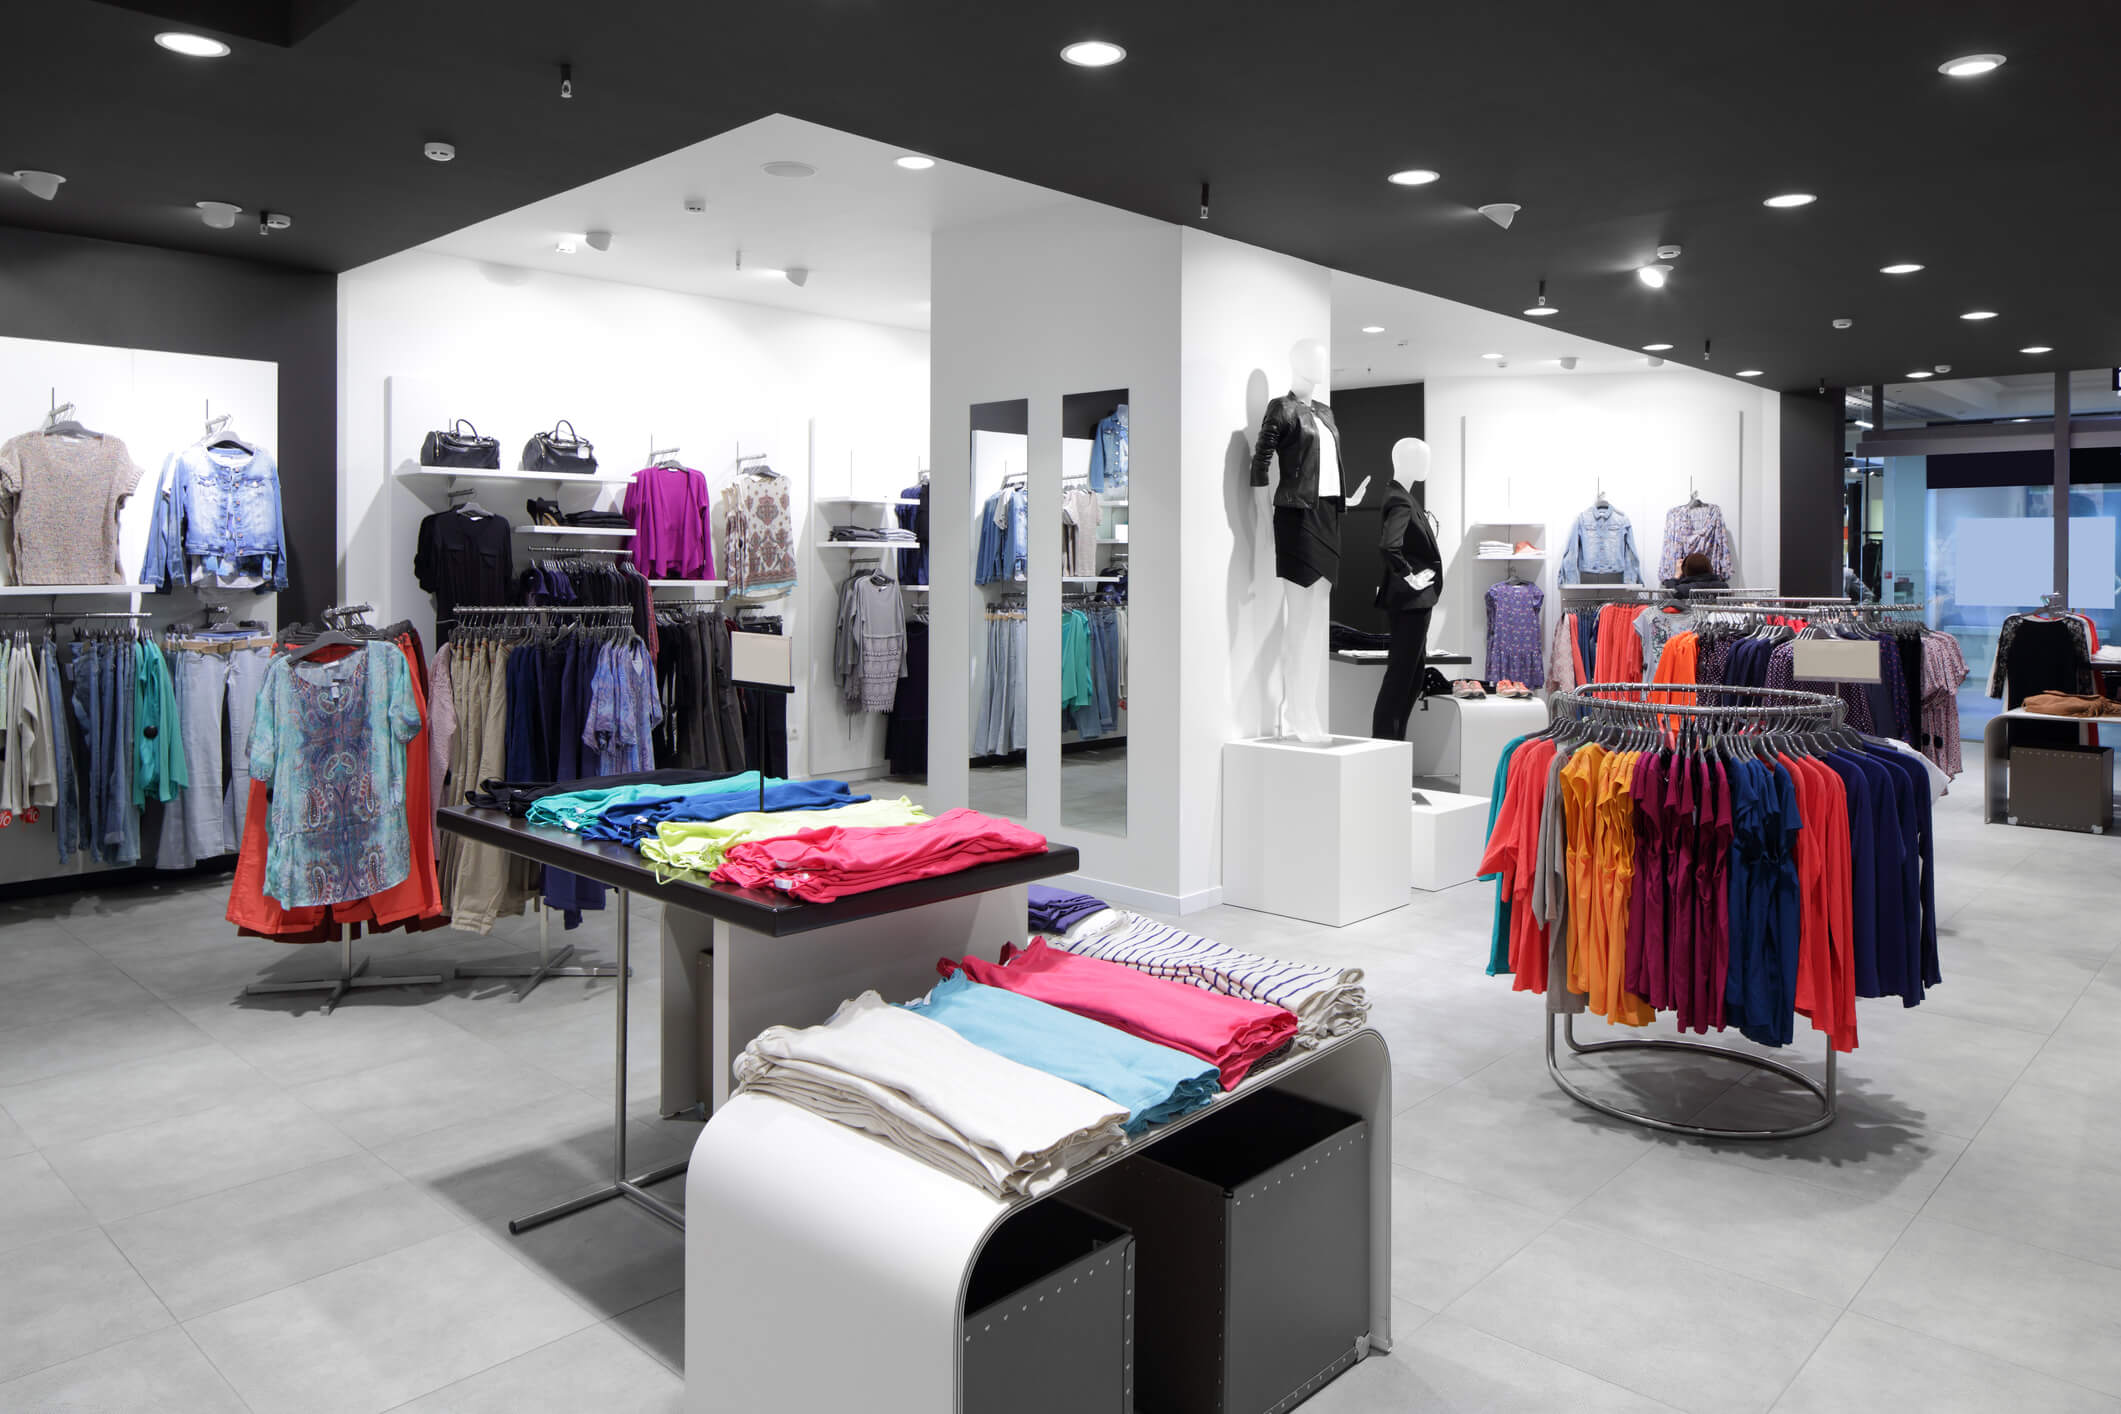 What is Visual Merchandising in a Retail Store?